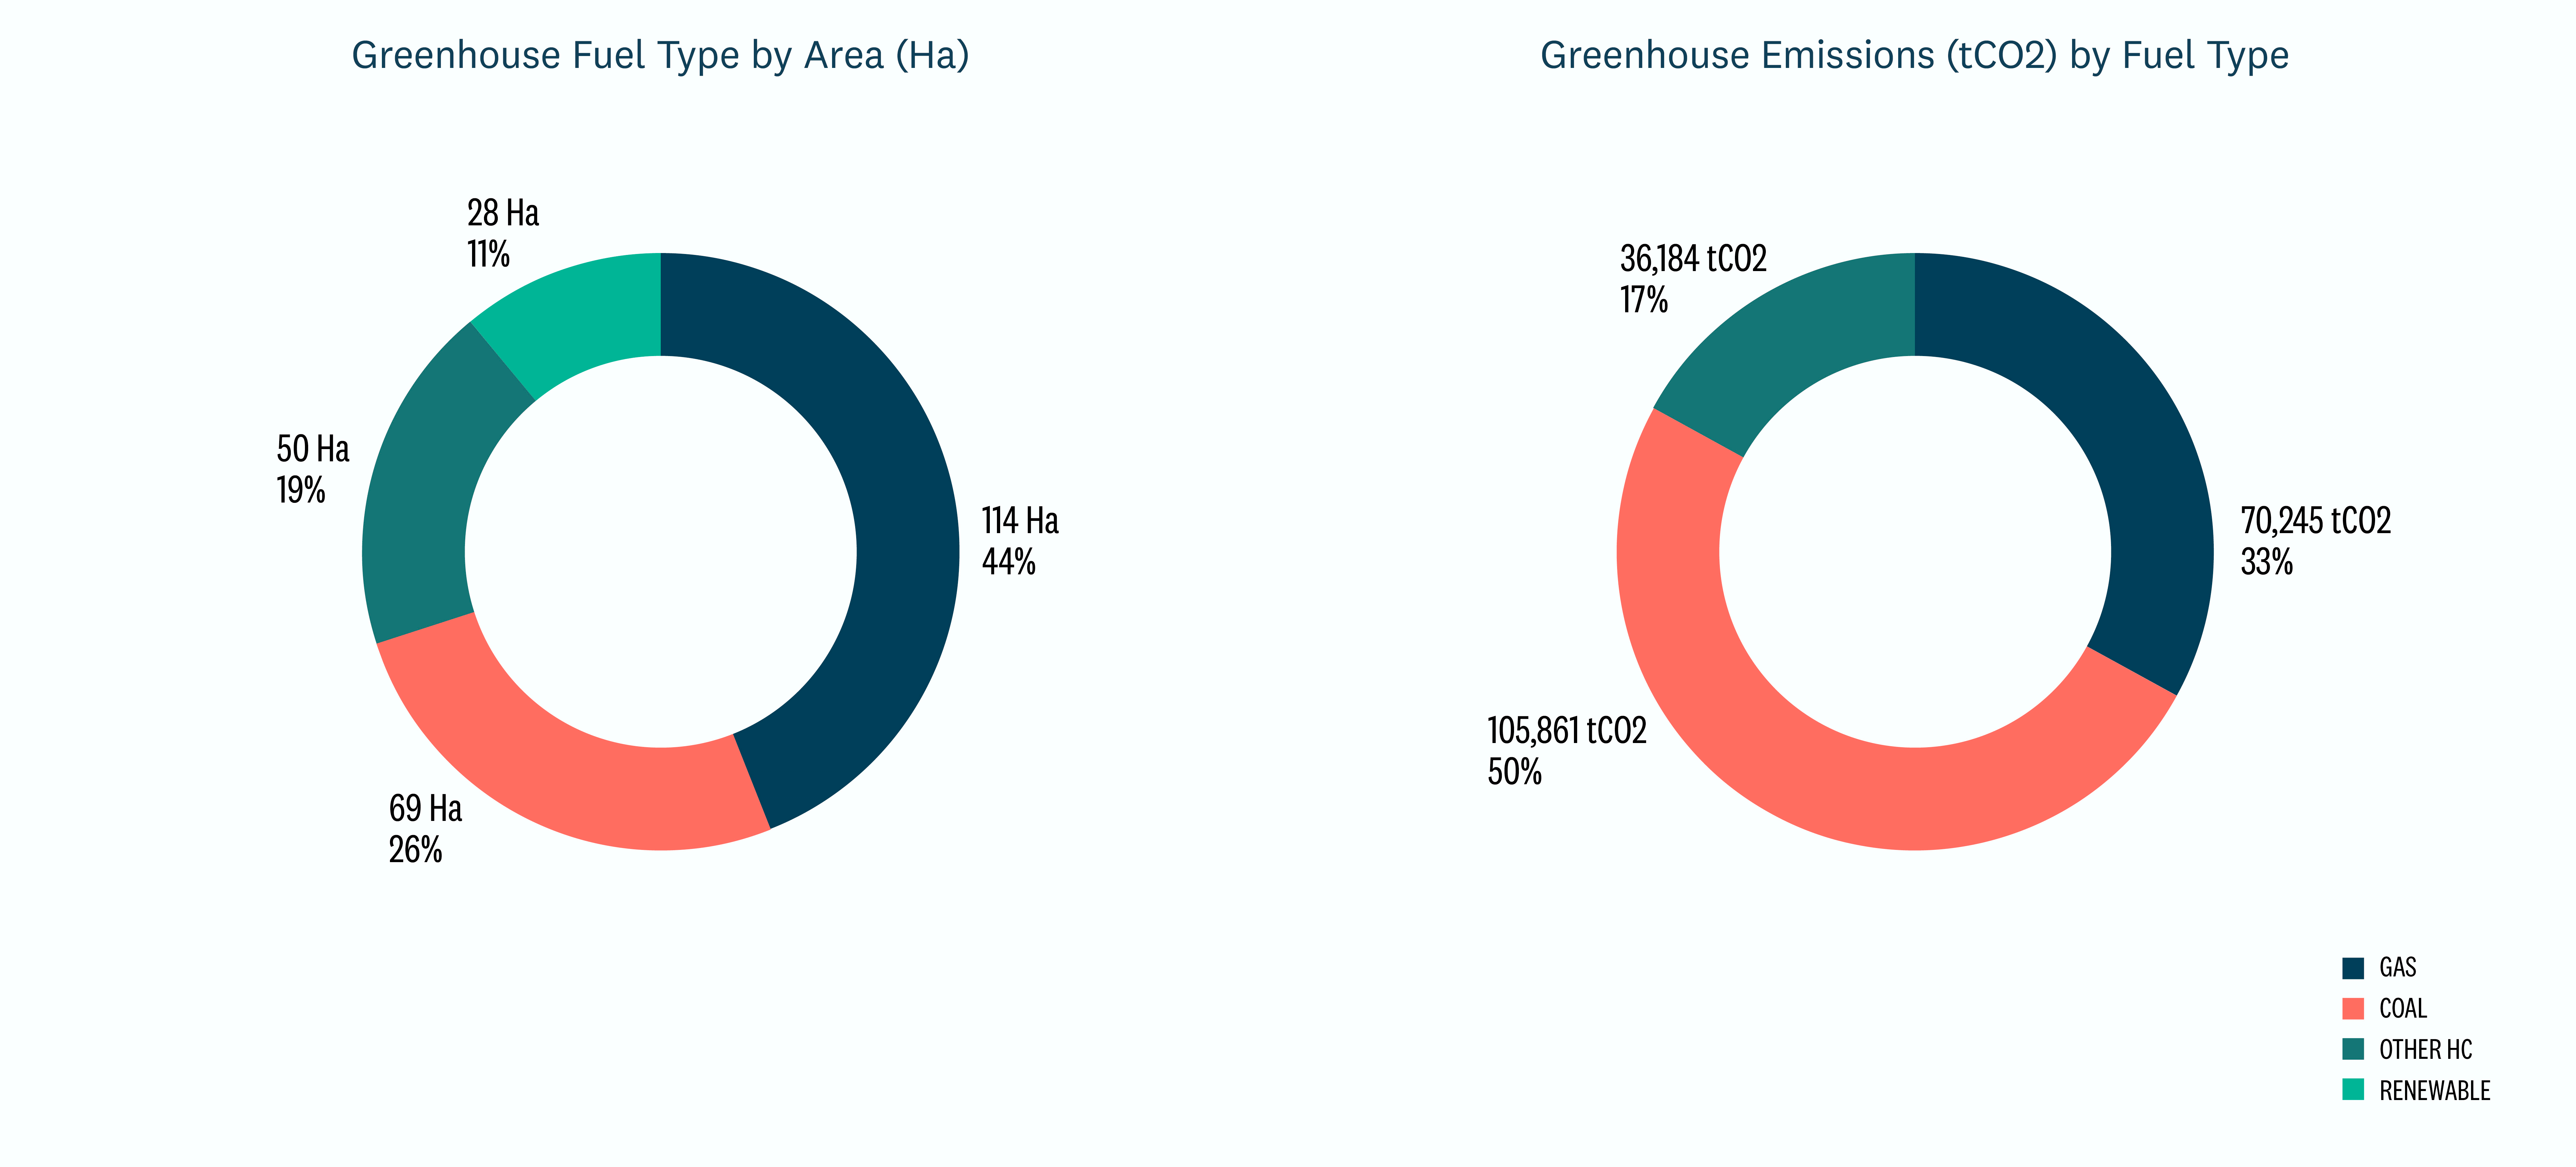 Two donut graphs show the breakdown of greenhouse fuel type by area (Ha) and greenhouse emissions (tCO2) by fuel type.. 